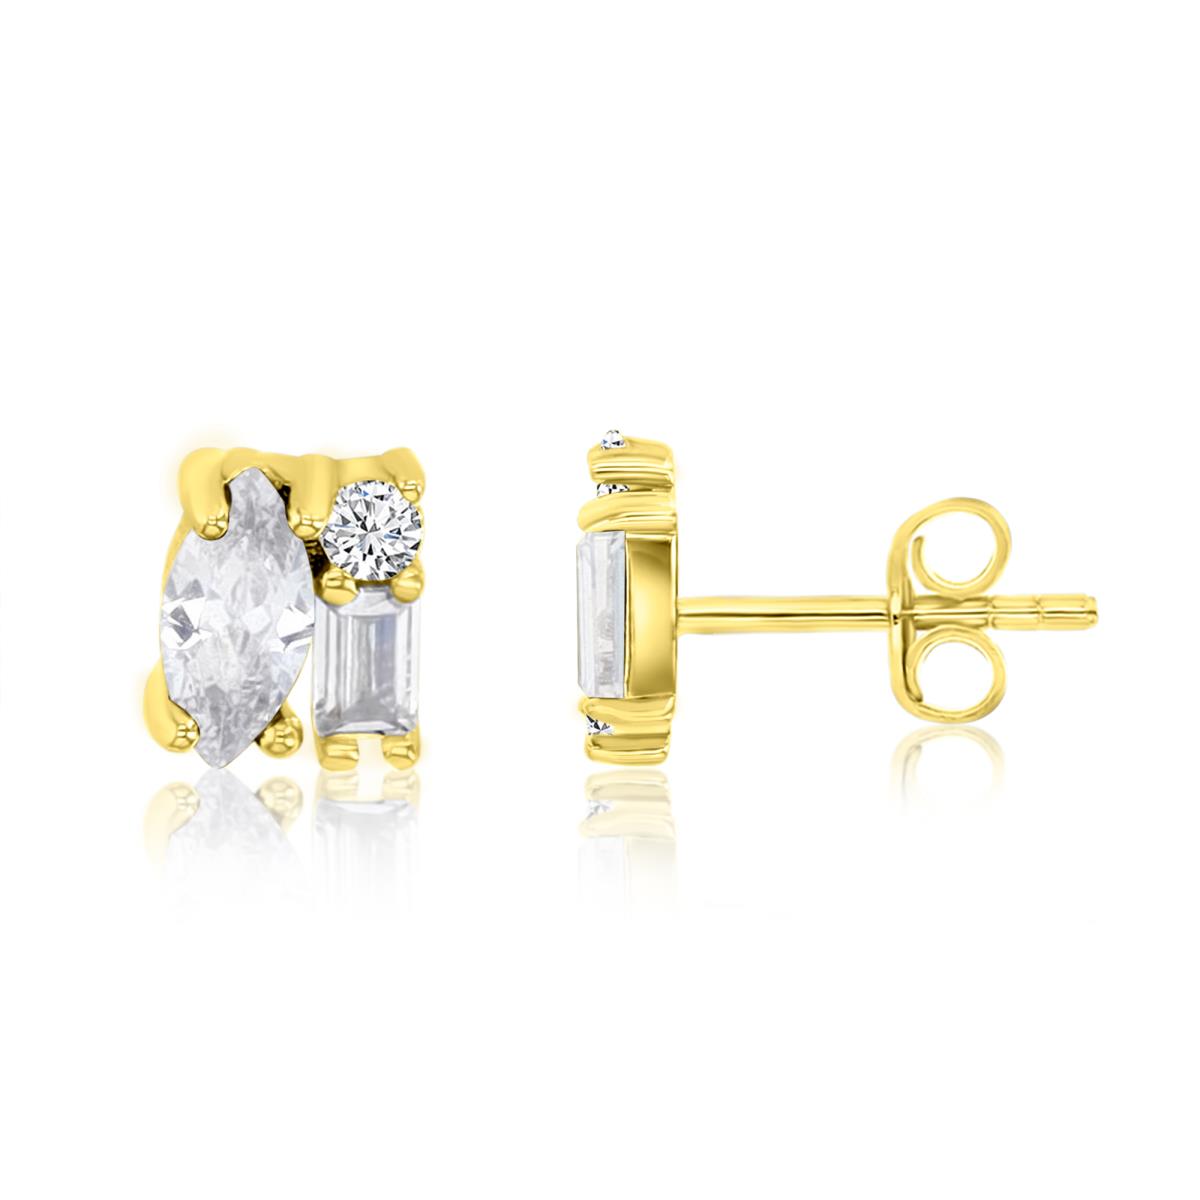 Sterling Silver Yellow 1M 5x6mm Polished White CZ Multishape Stud Earring